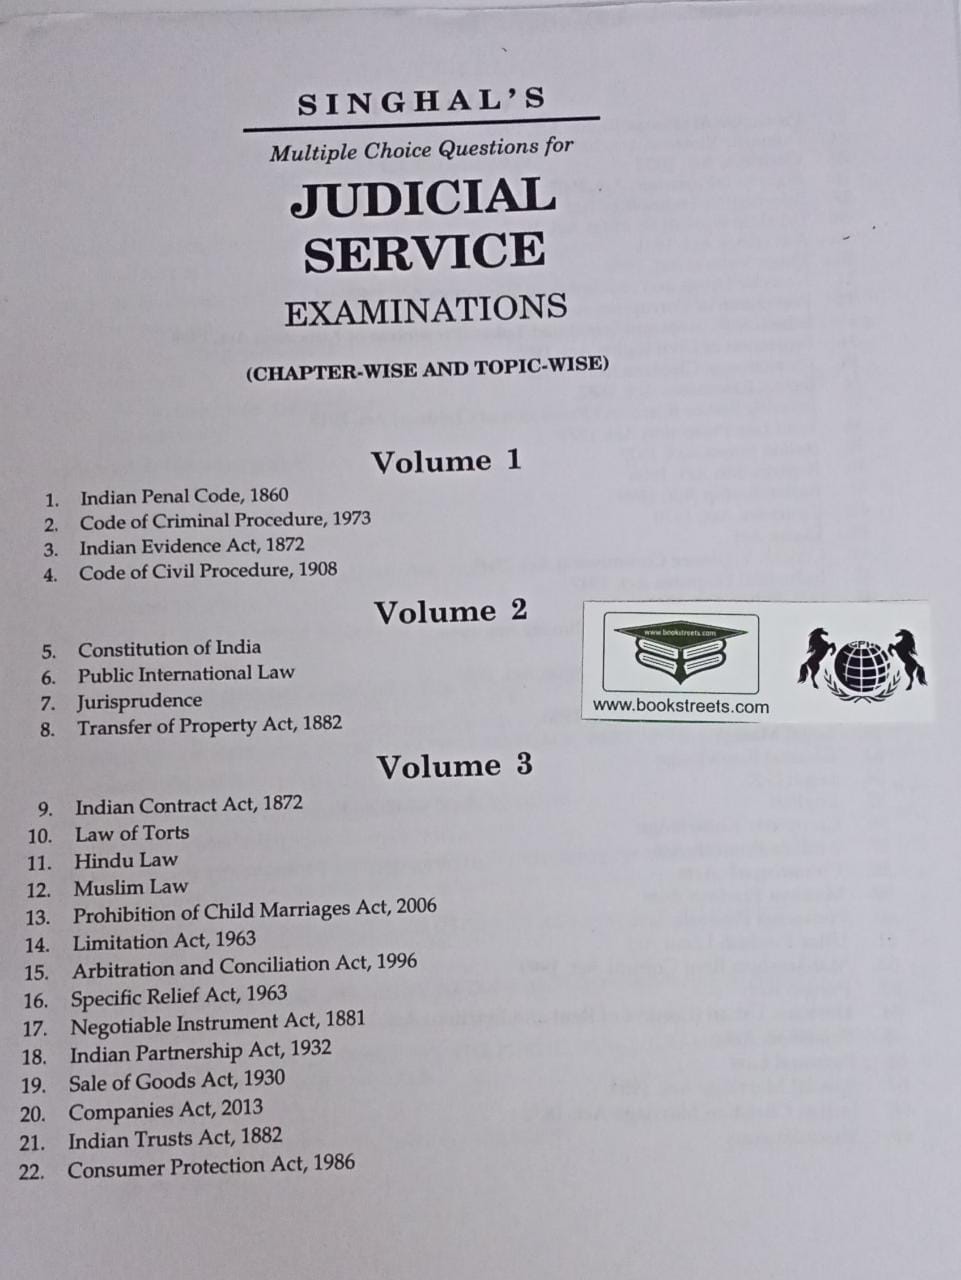 Singhal's Multiple Choice Question for Judicial Service Examination Chapter-wise and Topic wise Volume-1 by Singhal Law Publications